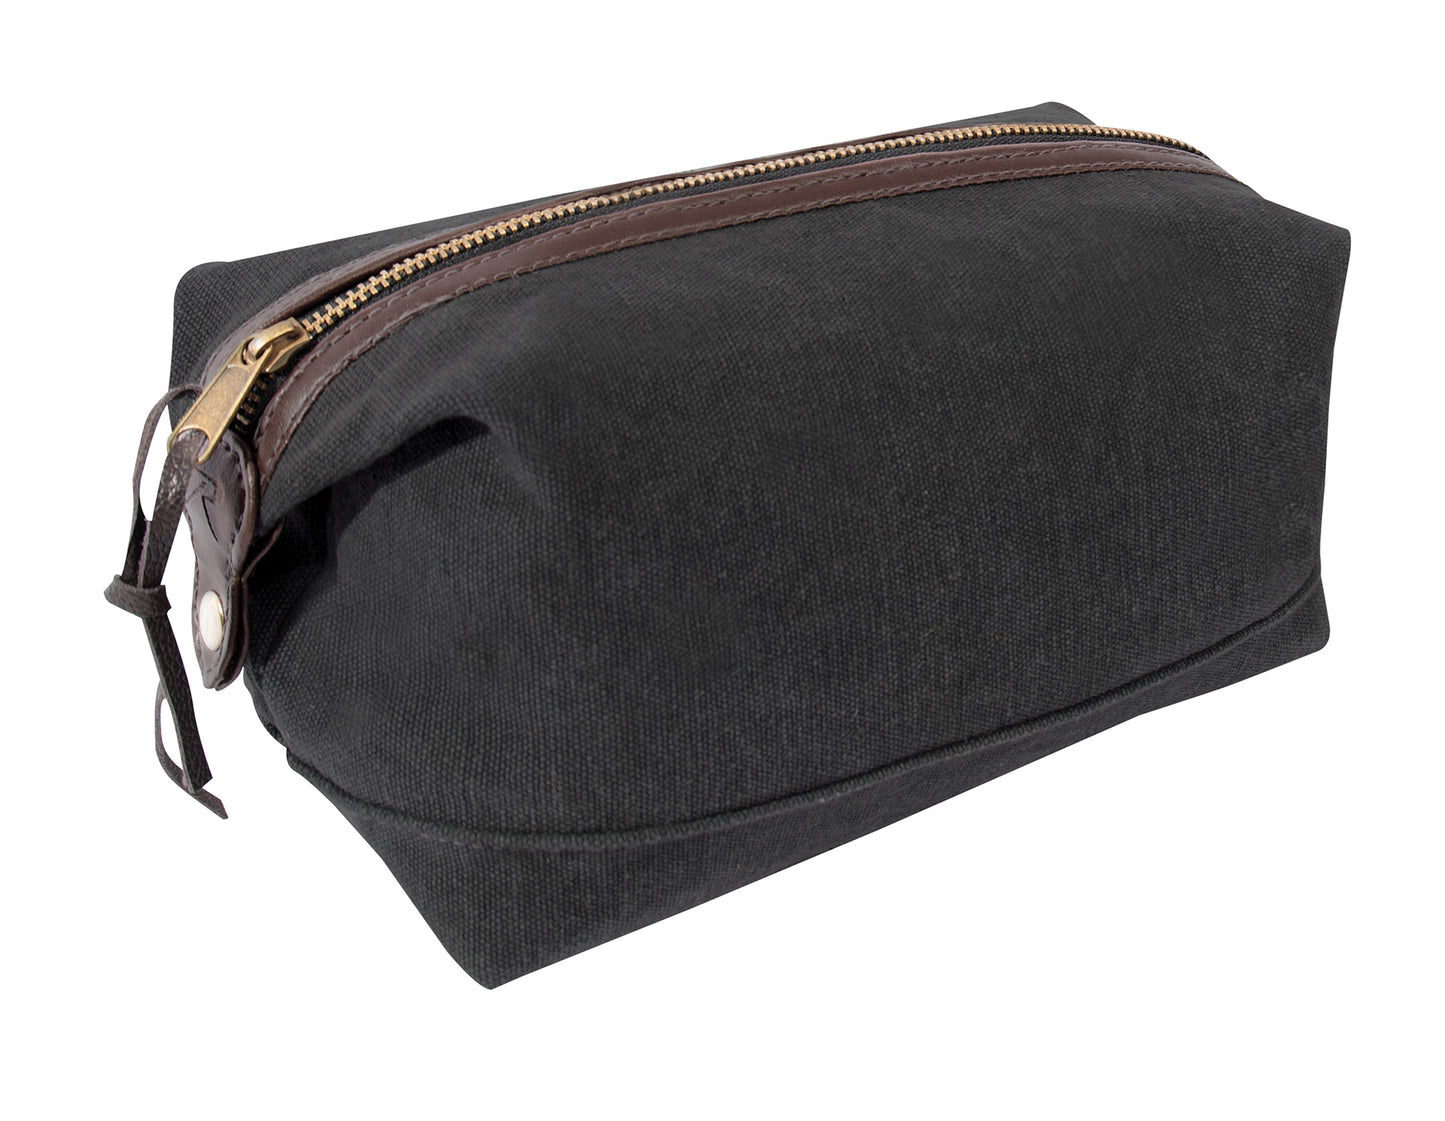 Rothco Canvas And Leather Travel Kit Toiletry Bag